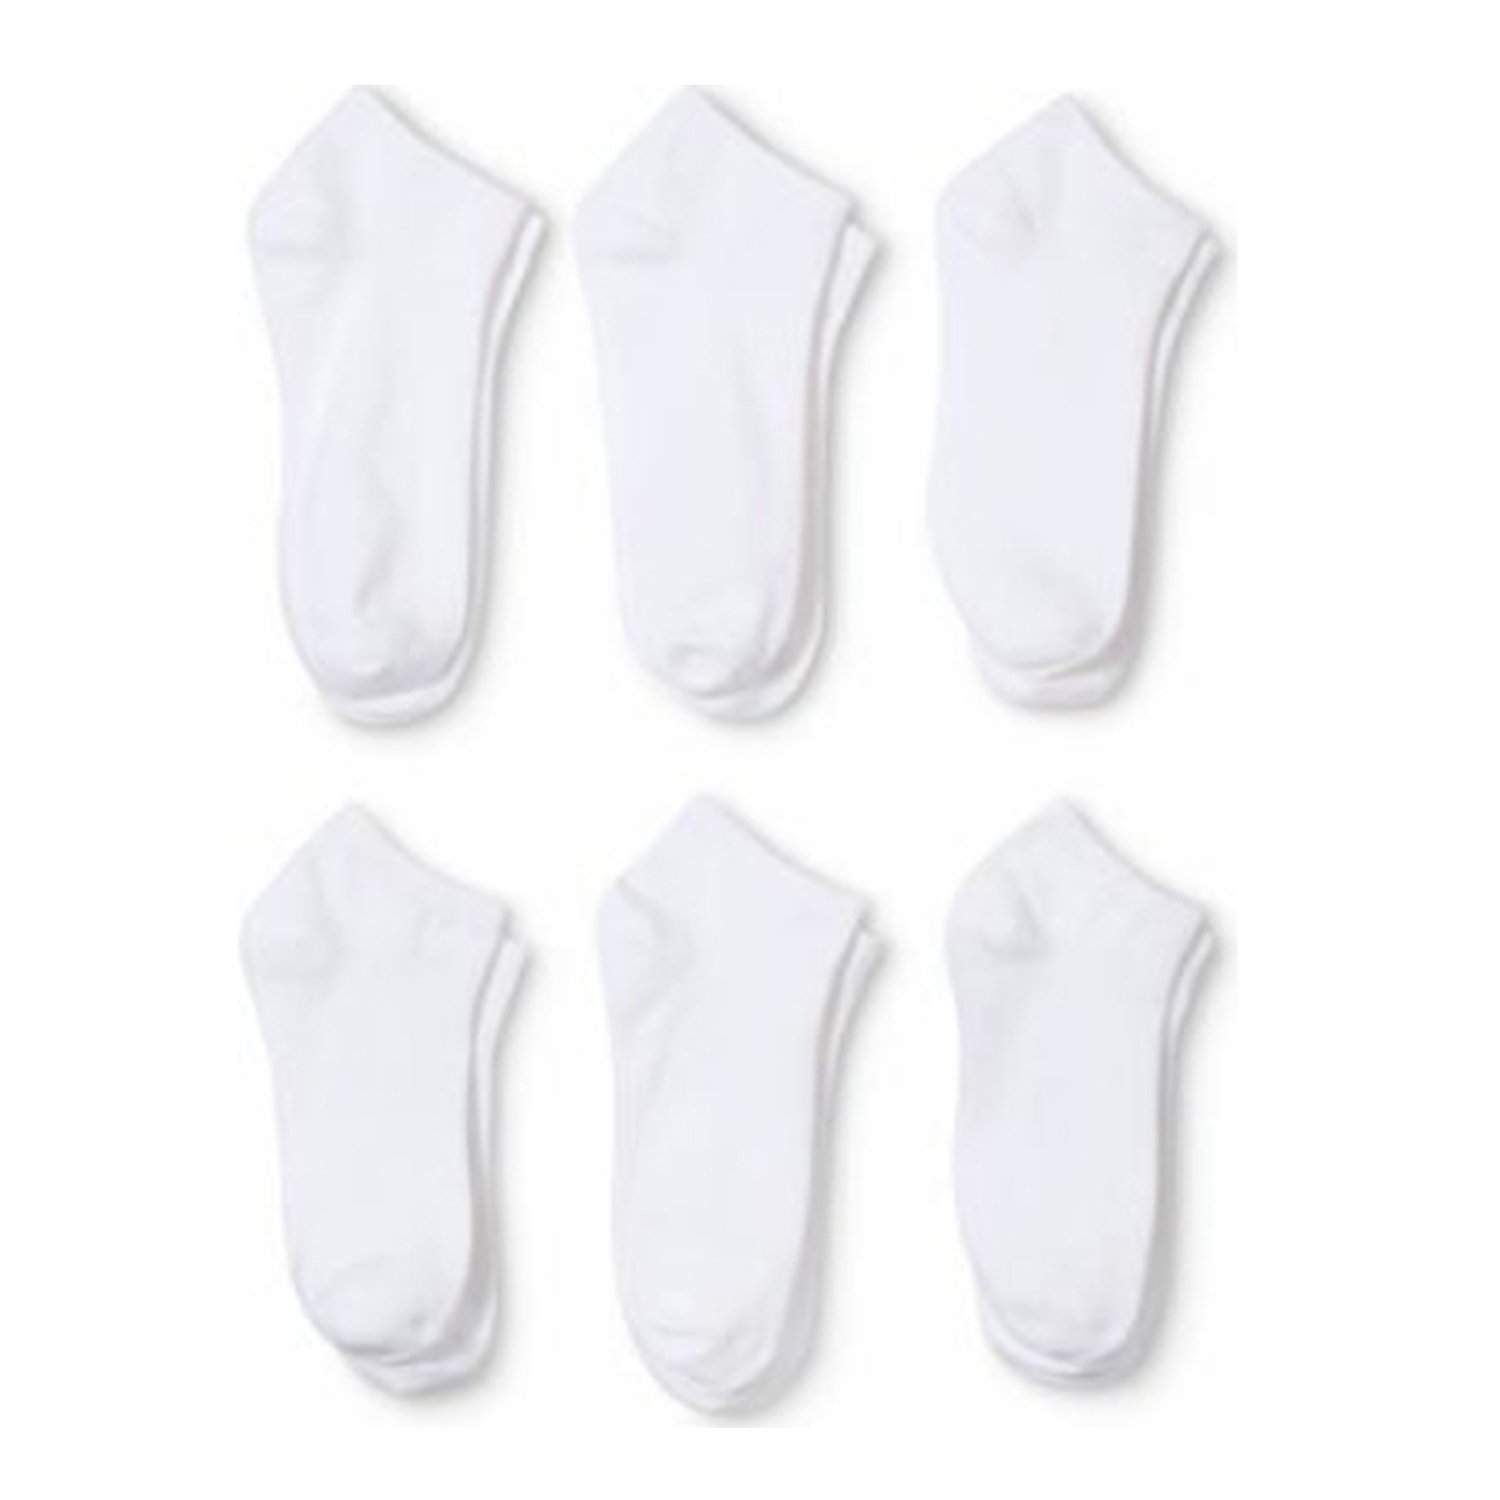 144 Pairs Qraftsy Men's Low Cut Polyester Socks - Wholesale Lot